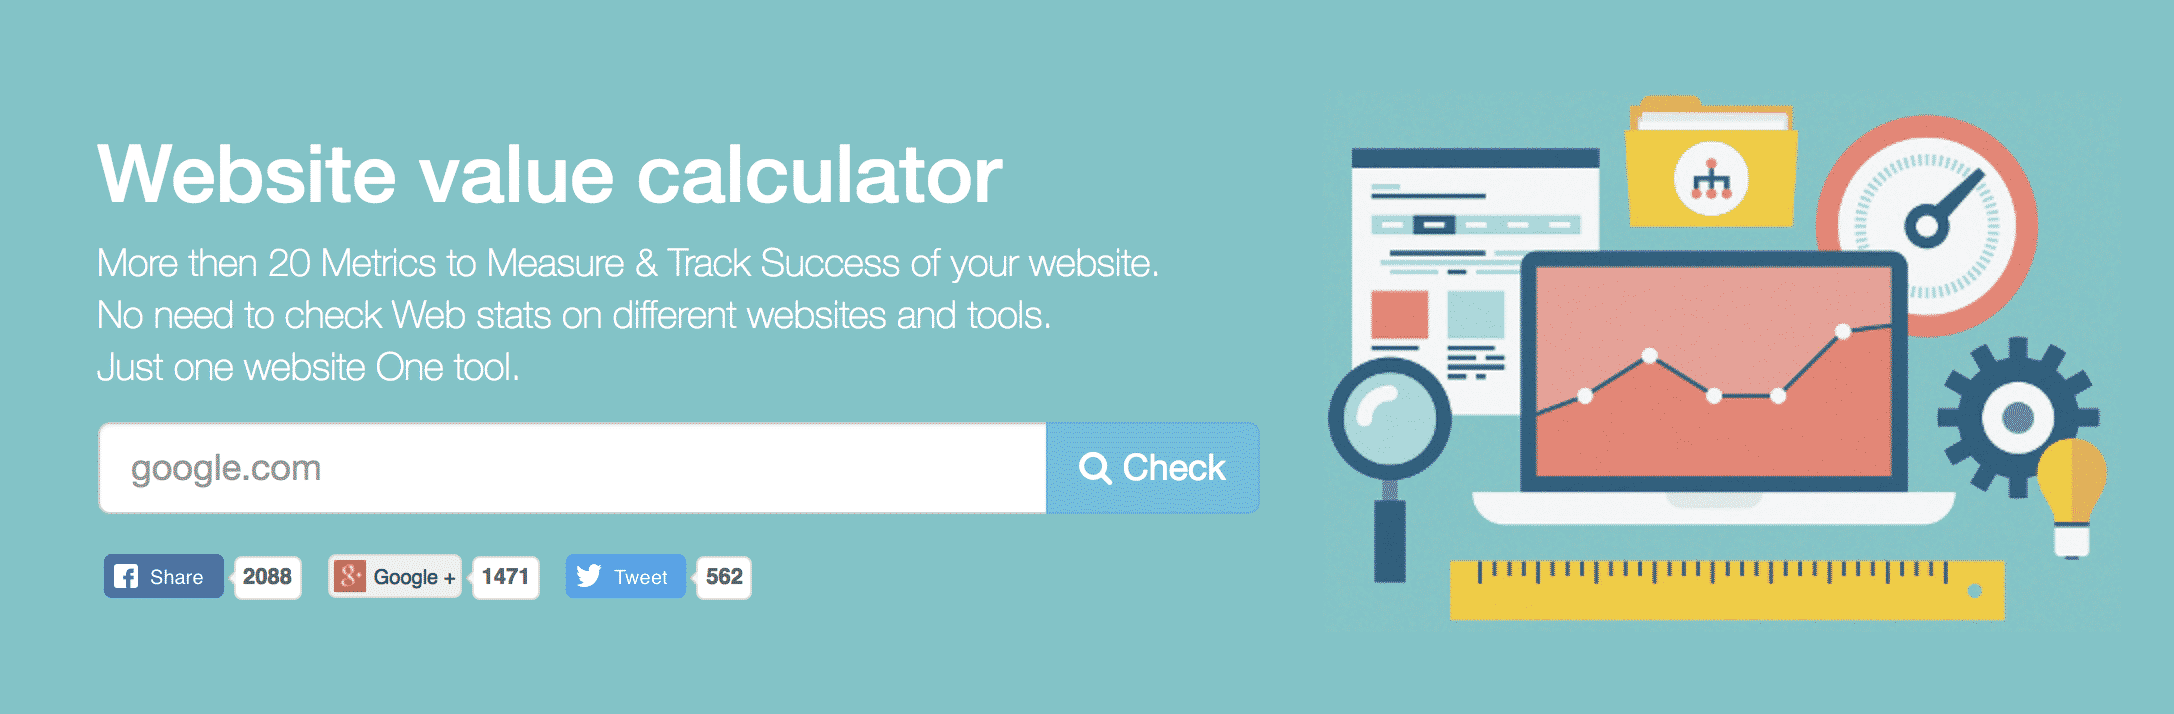 Website Outlook - Domain Valuation Tool